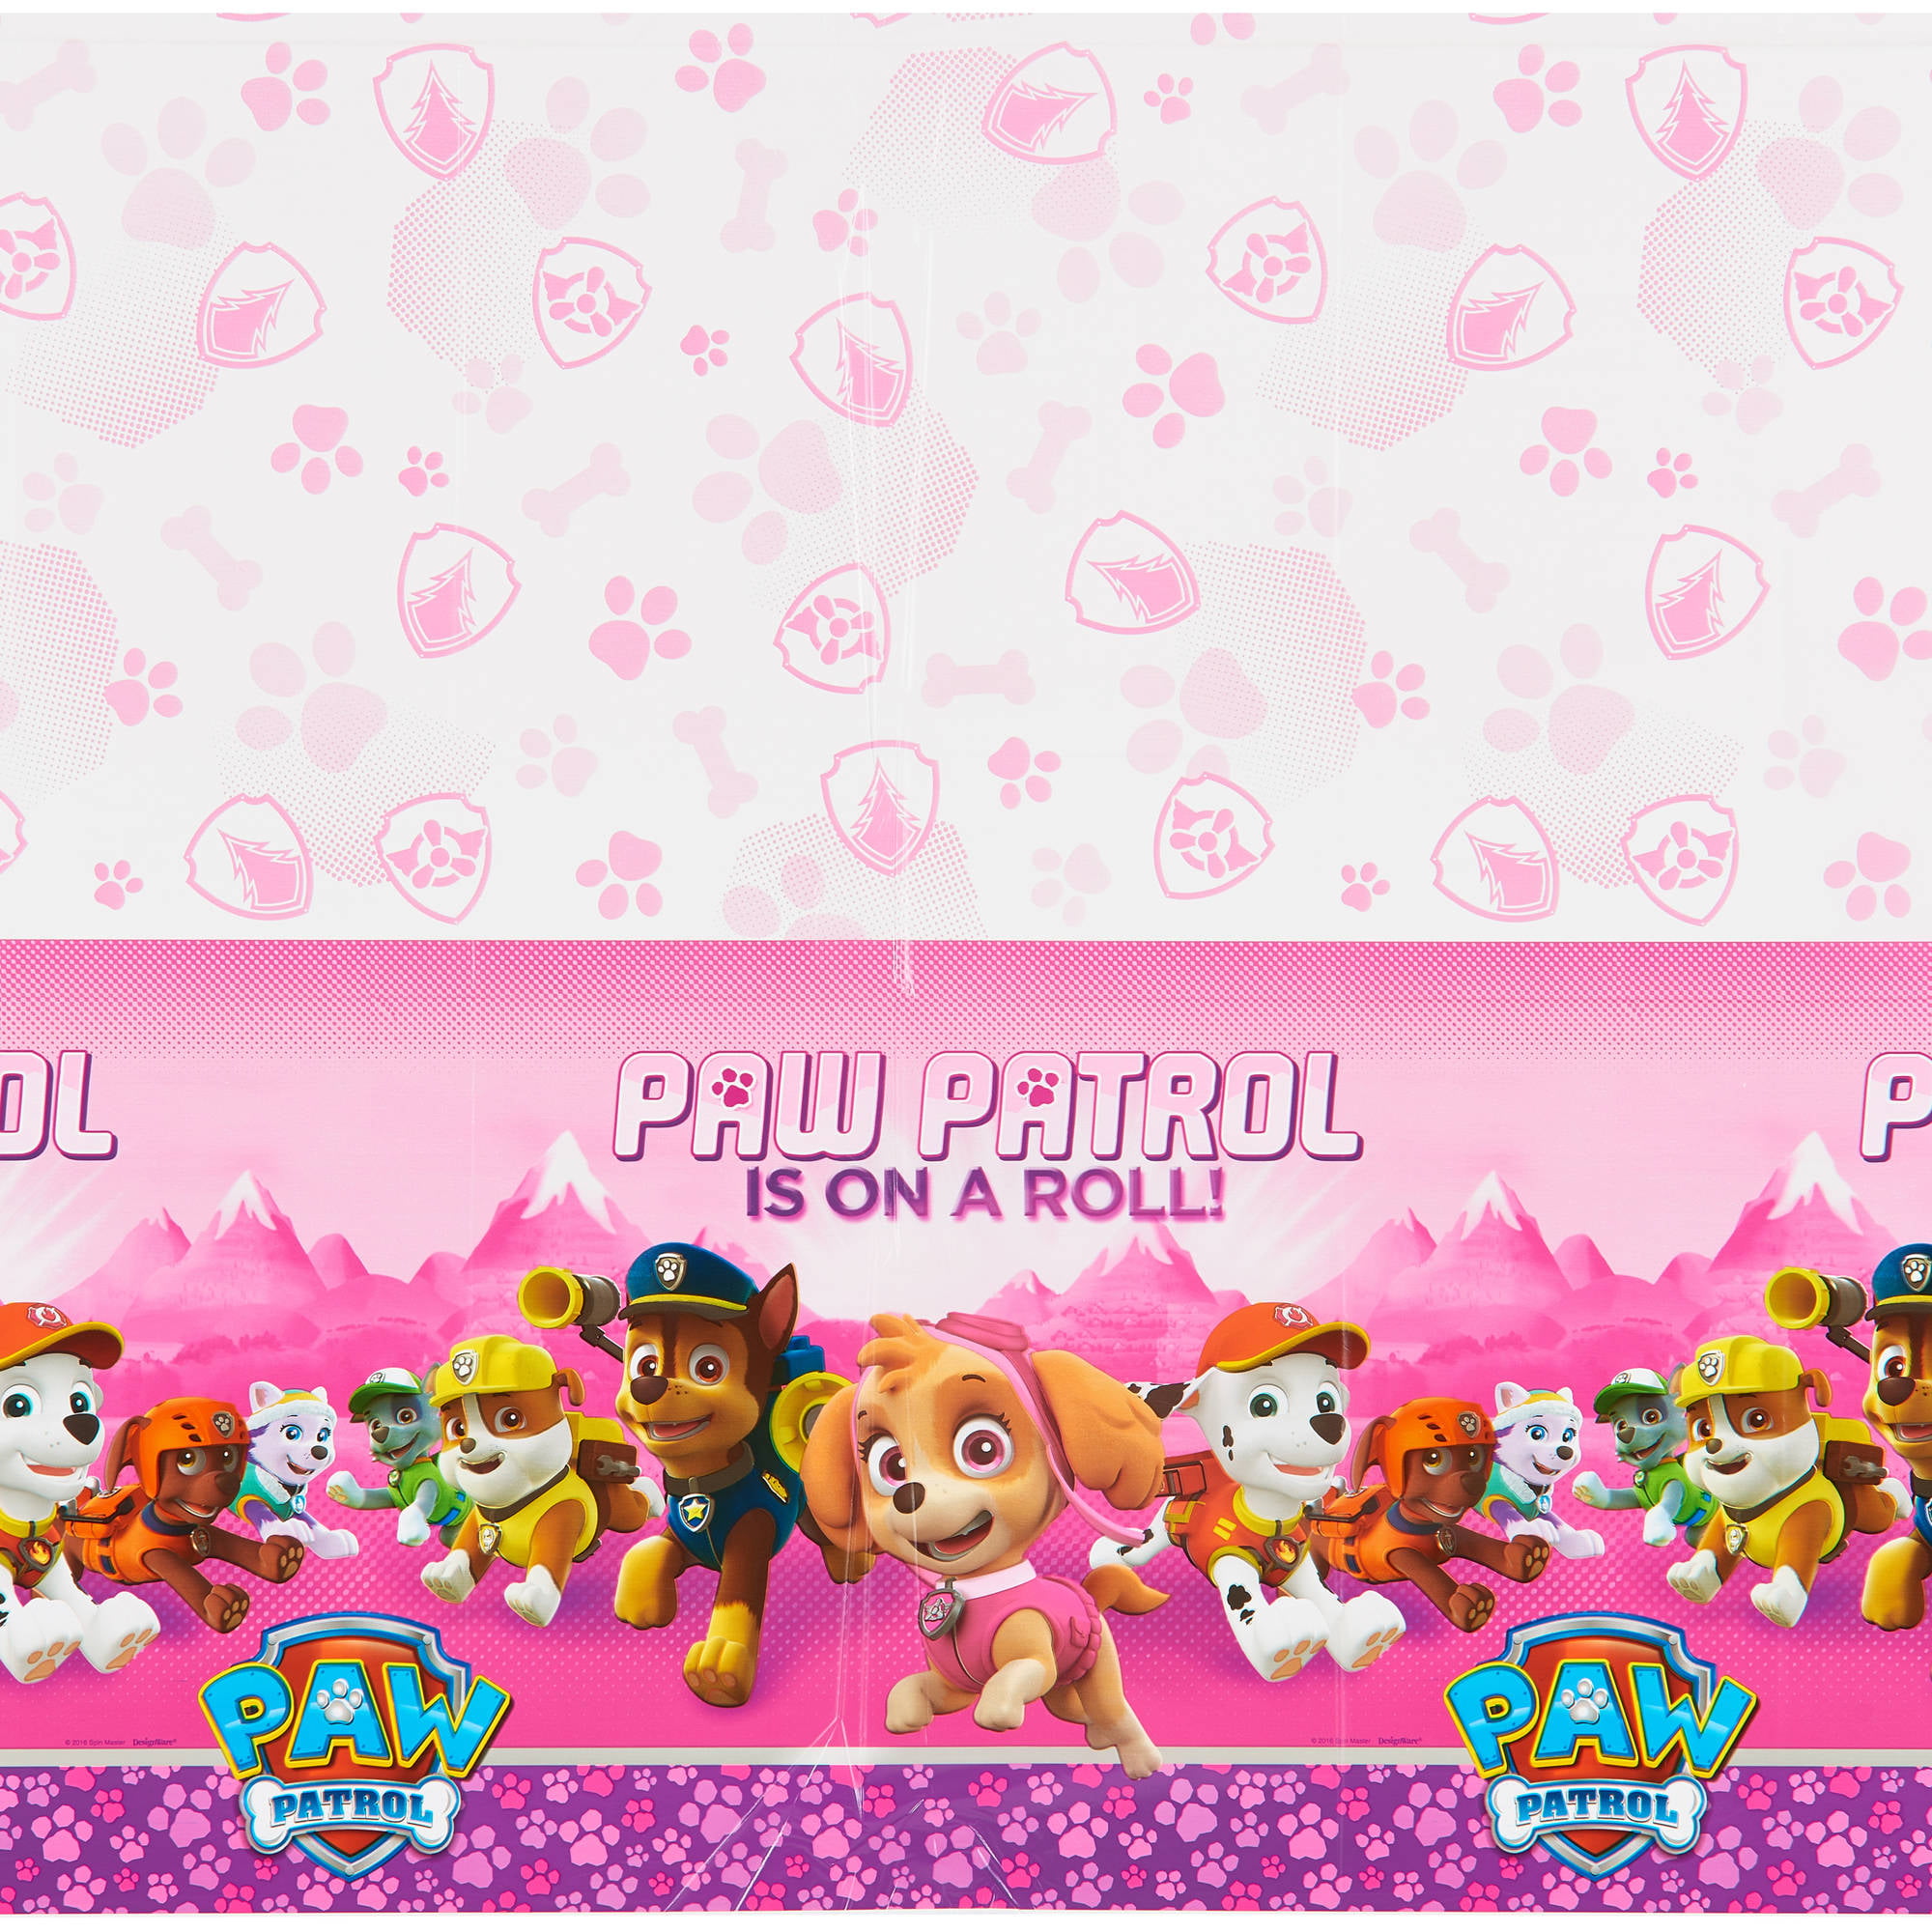 Details about   PAW PATROL SKYE TABLECOVER Birthday Decoration Party Supplies Tablecloth Pink NW 